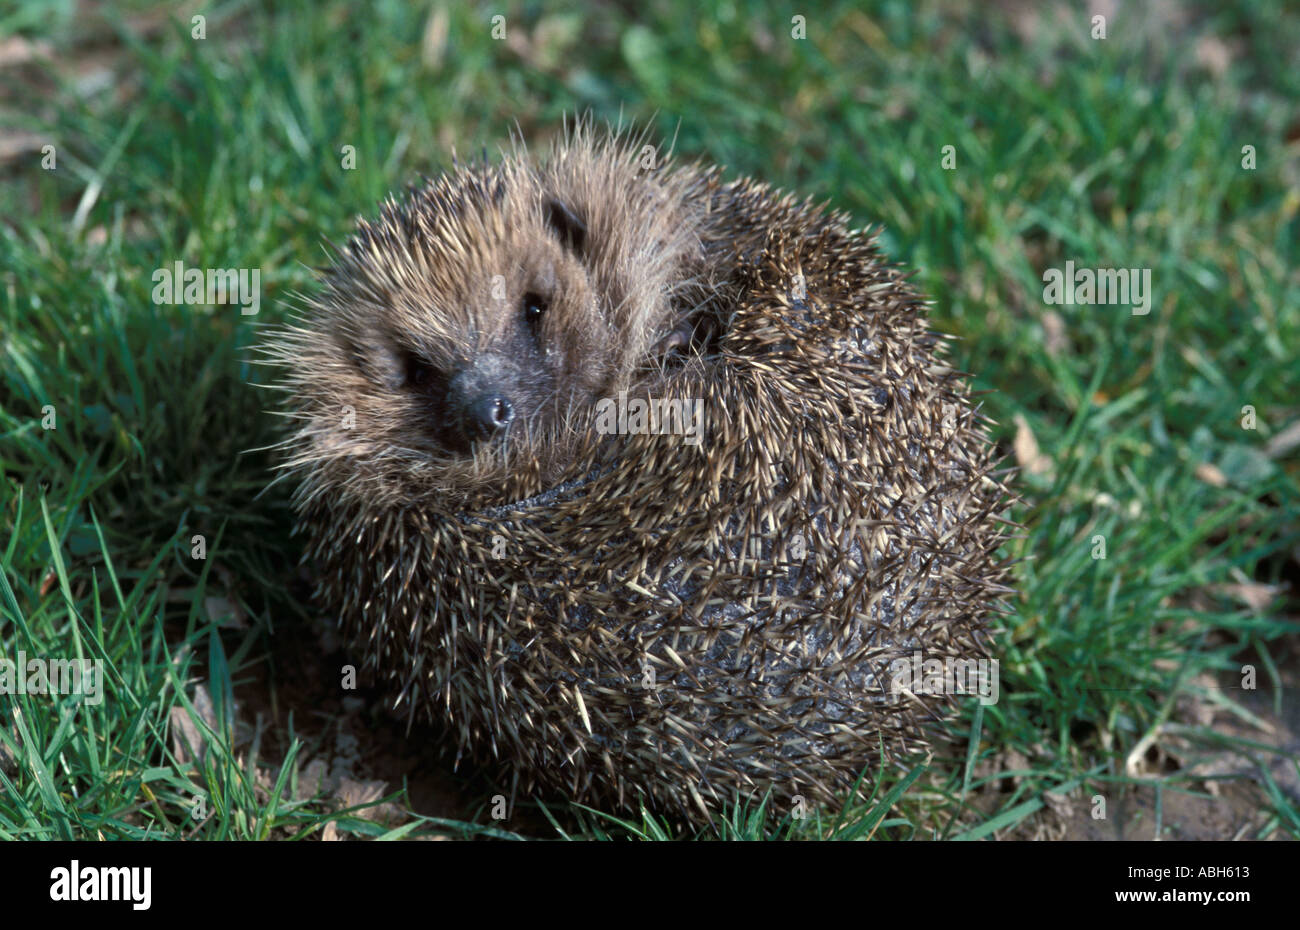 Hedgehog on grass curled in ball emerging from curl sequence Stock Photo